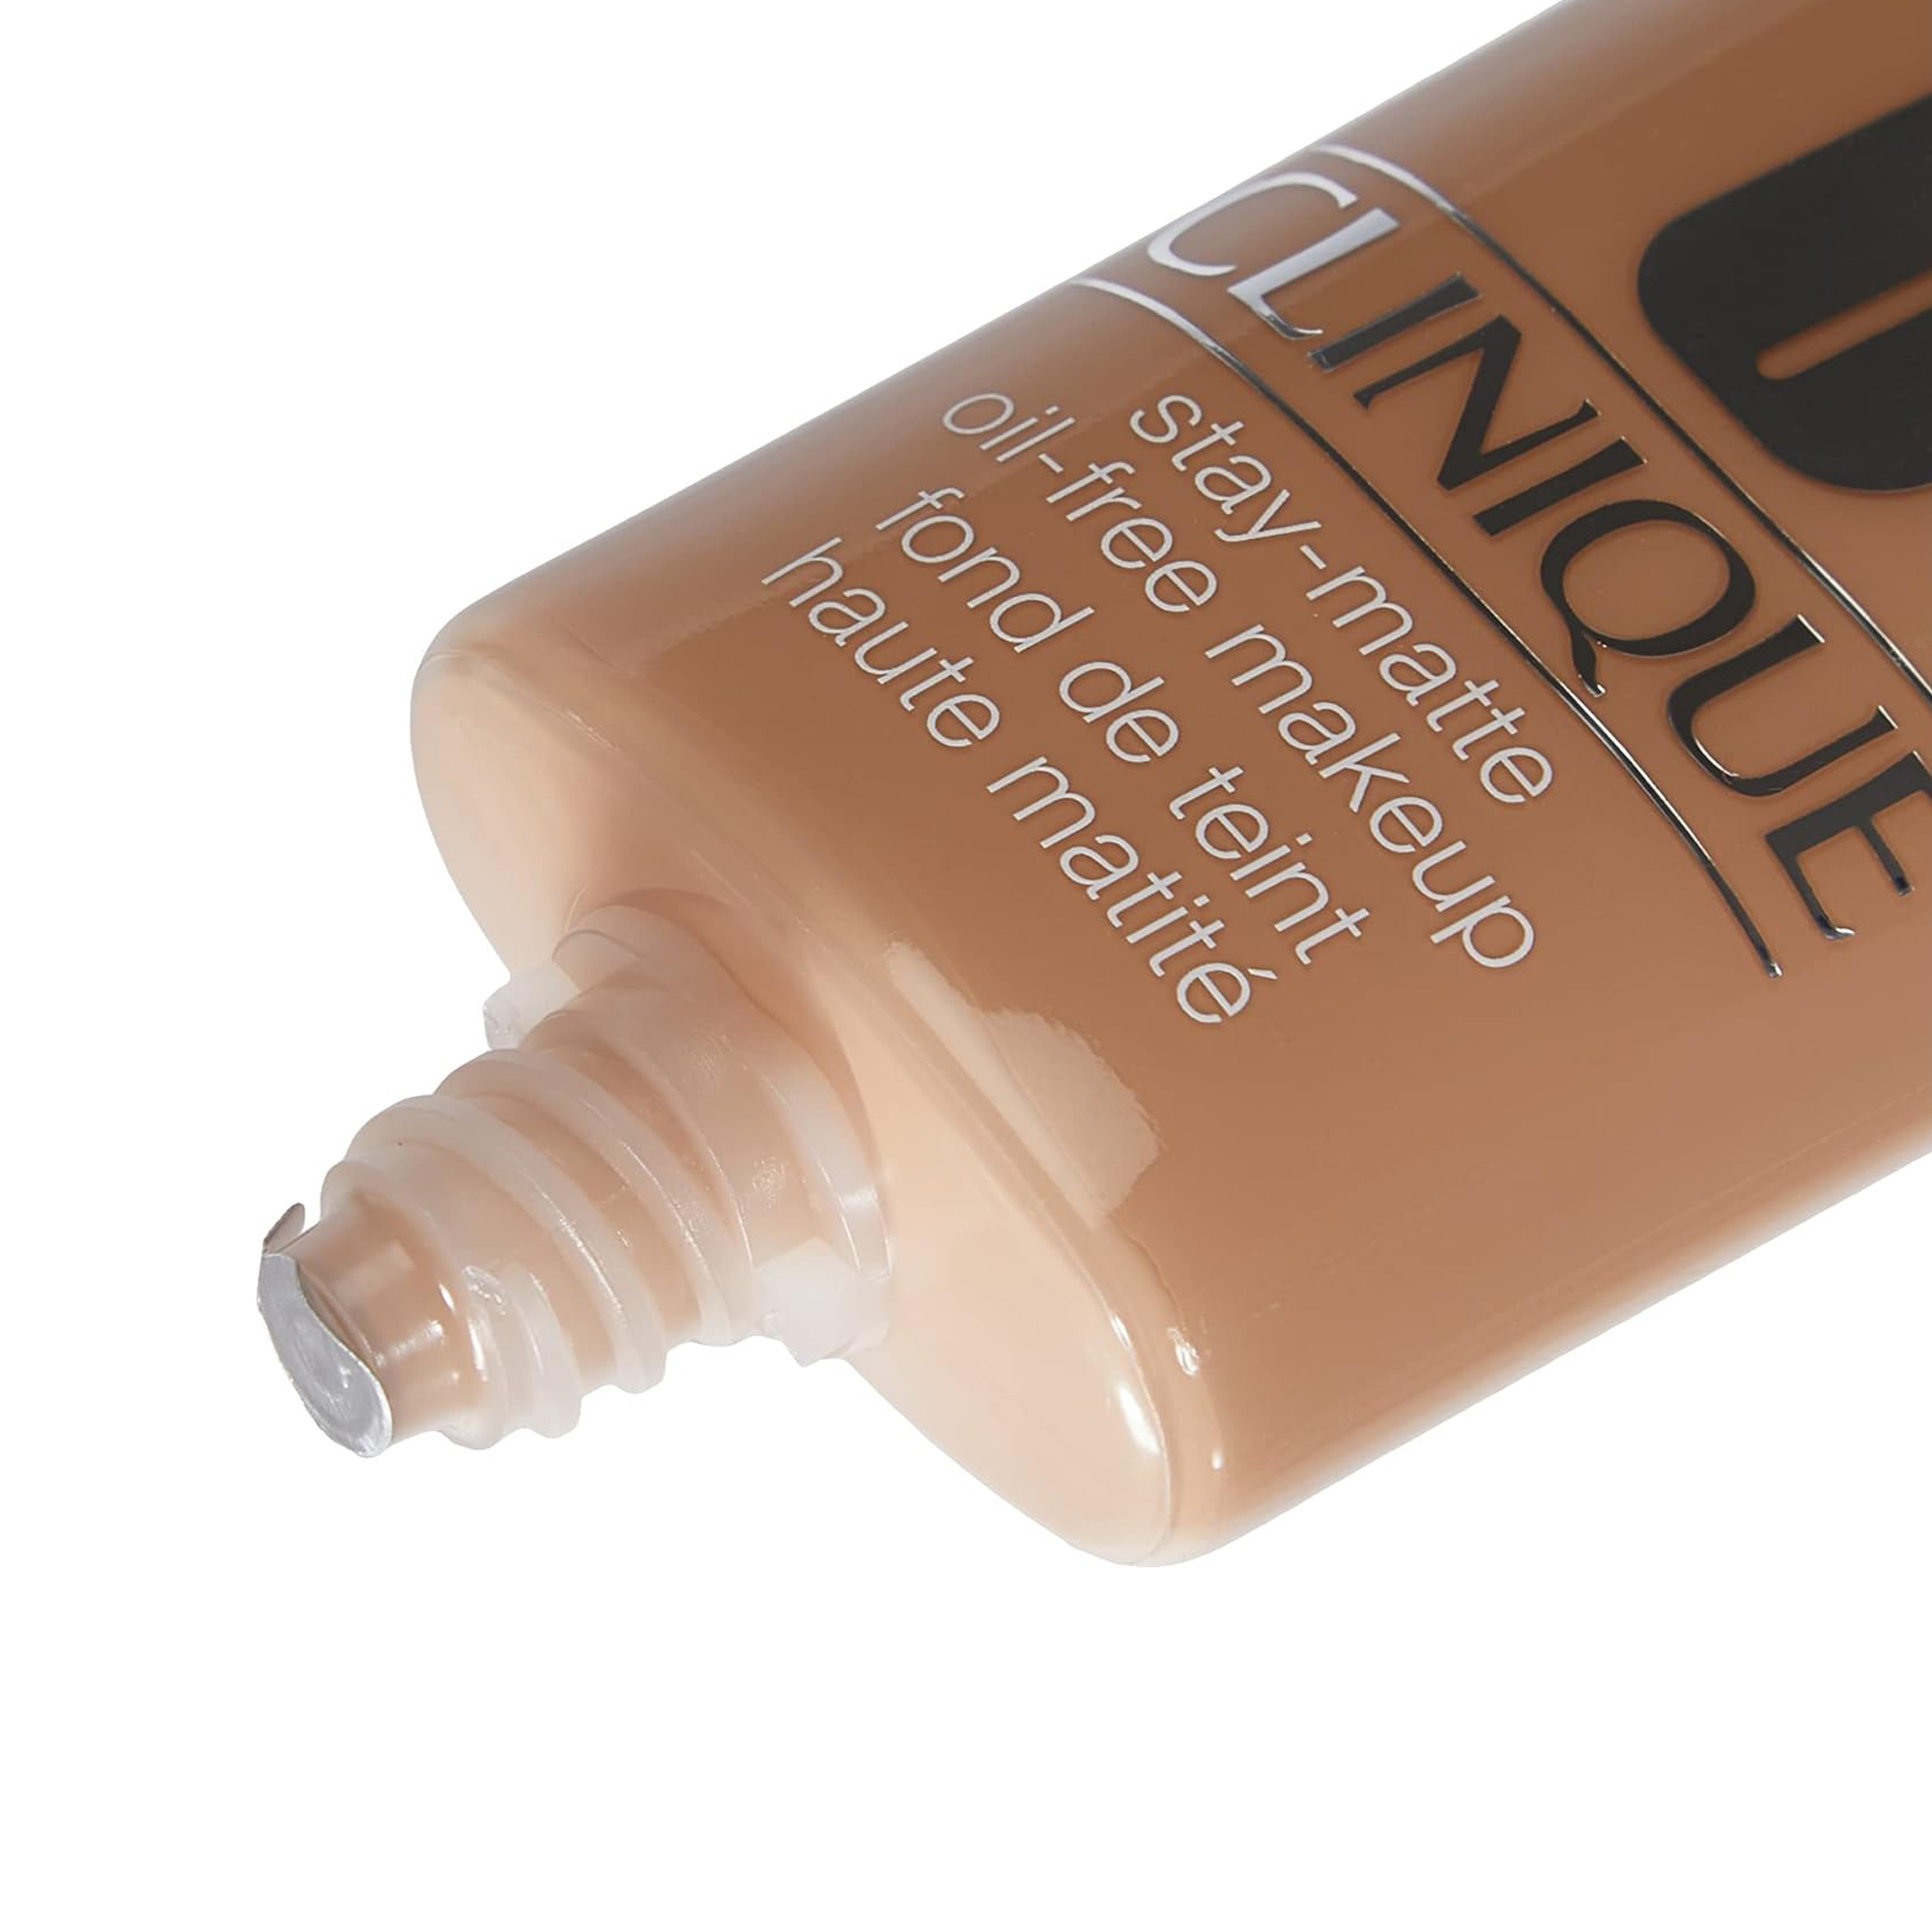 Clinique Stay Matte Foundation Cn 90 Sand 1 oz - image 5 of 5